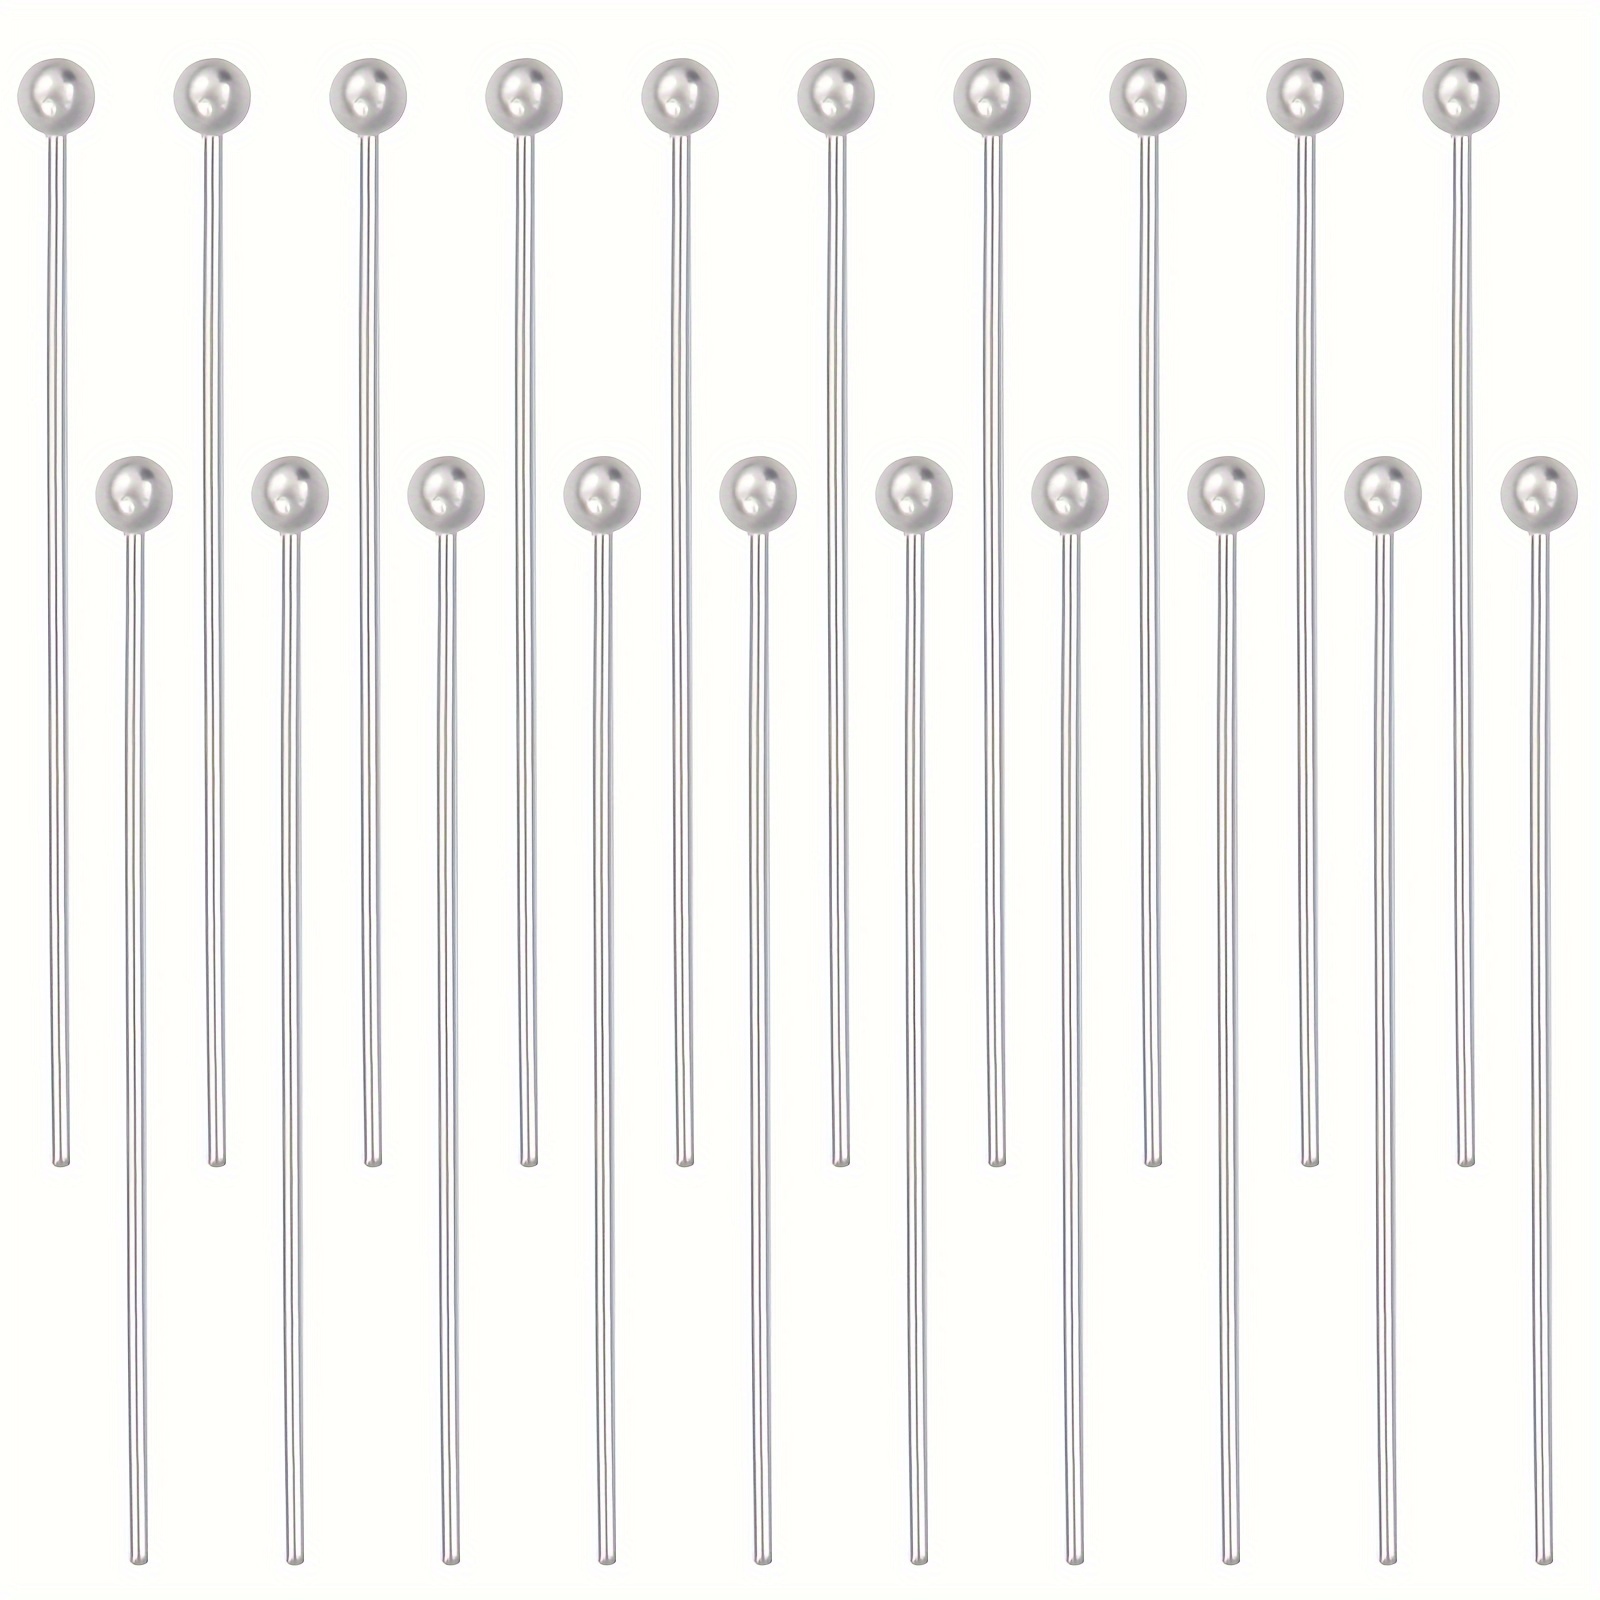 

100-pack 201 Stainless Steel Ball Head Pins For Jewelry Making, Diy Earrings, Charms, And Crafts - Assorted Sizes